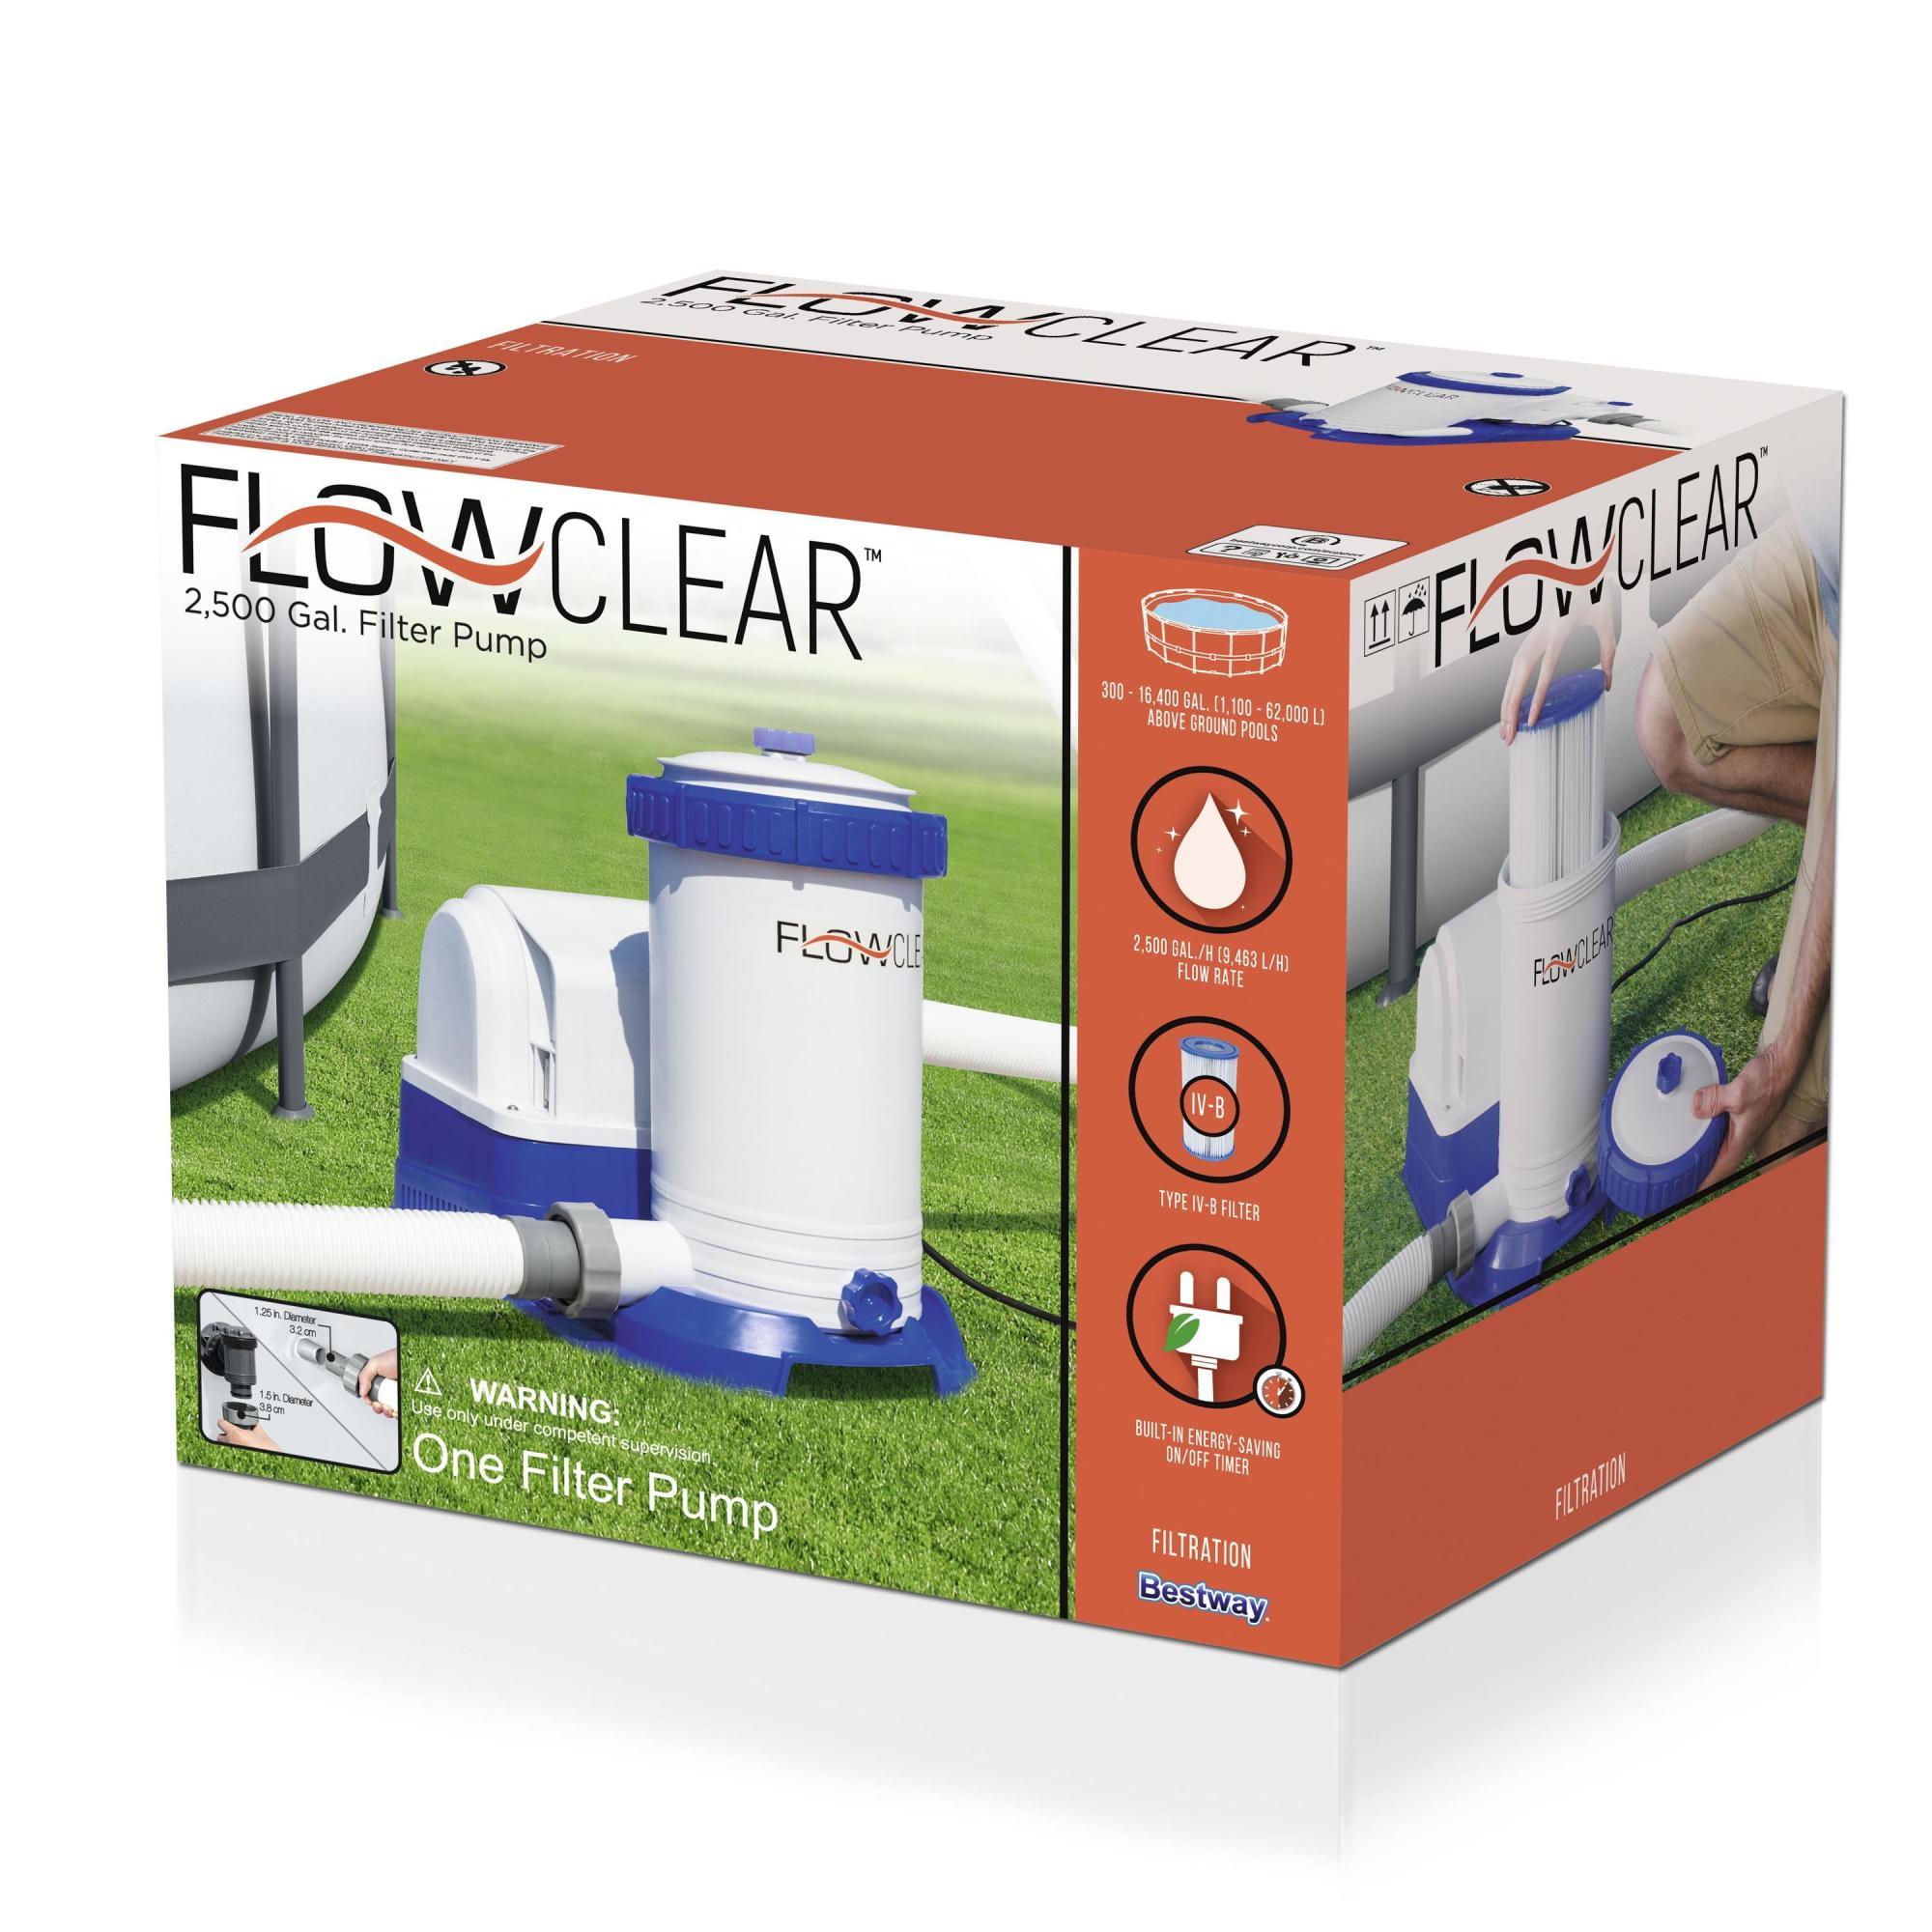 GPH Above Pump 58392E Pool Water Flowclear 2500 Bestway Ground Filter